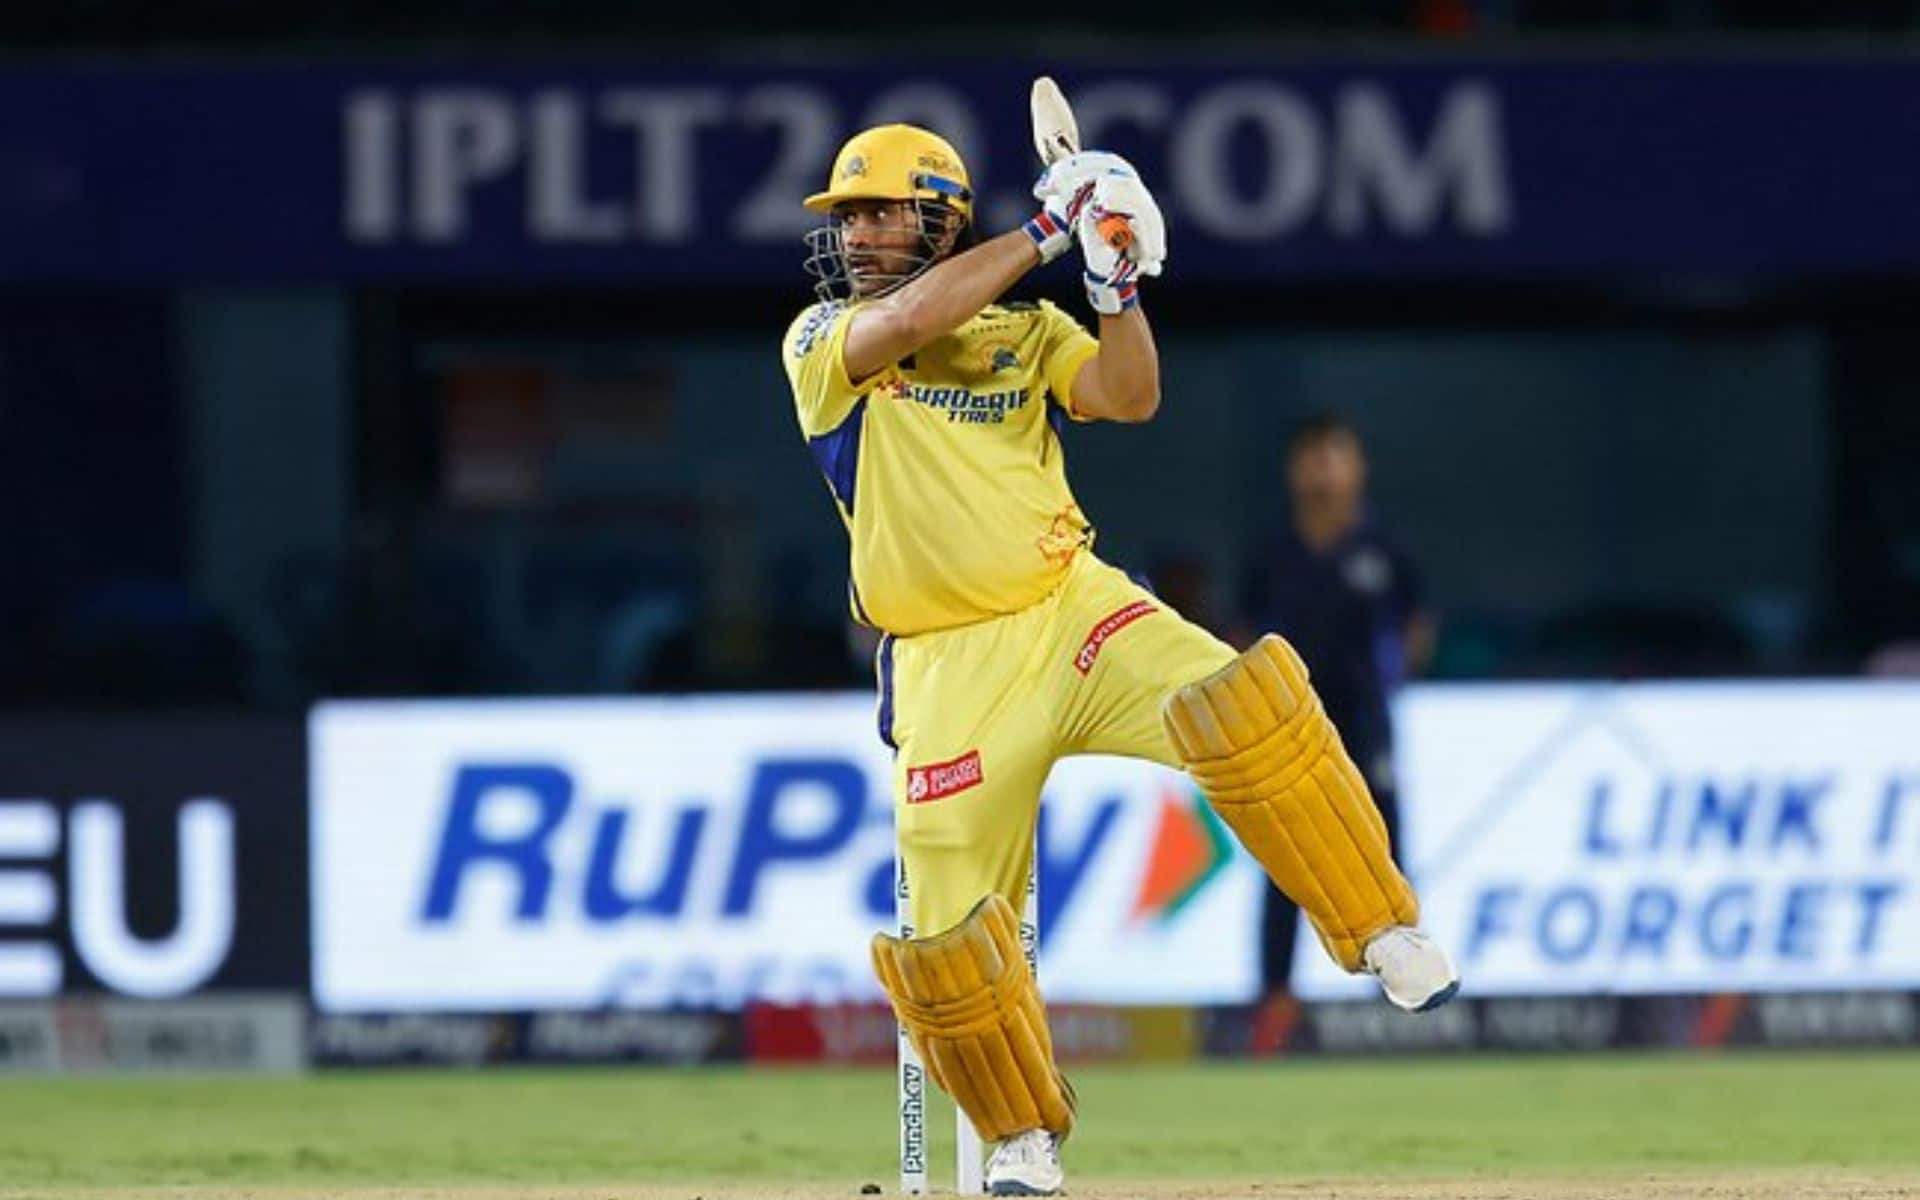 MS Dhoni has the most sixes in 20th over in the IPL (X.com)